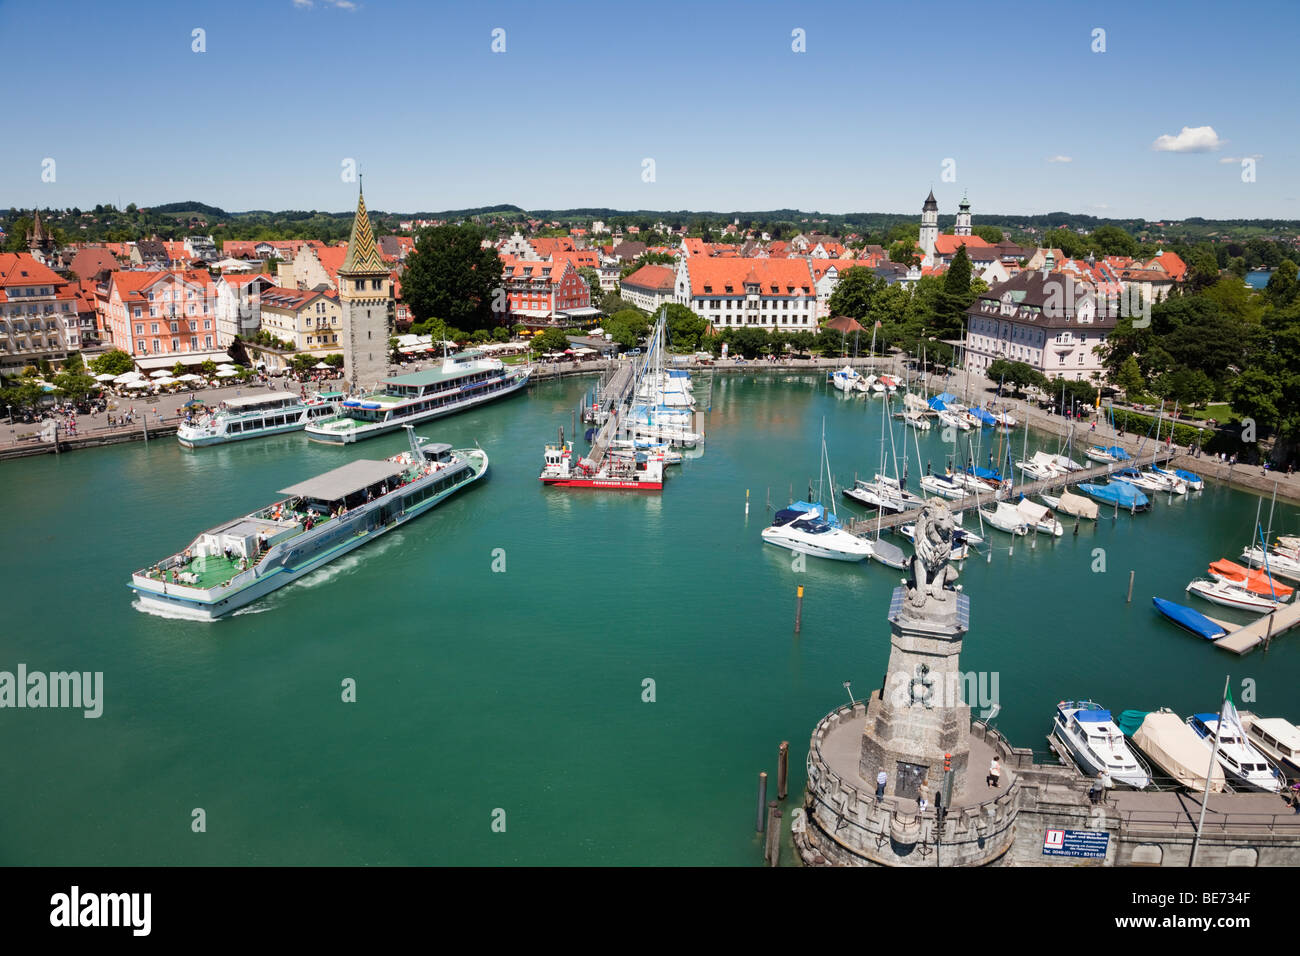 Aerial view of boats in harbour and picturesque old town waterfront on Lake Constance (Bodensee). Lindau, Bavaria, Germany, Europe Stock Photo